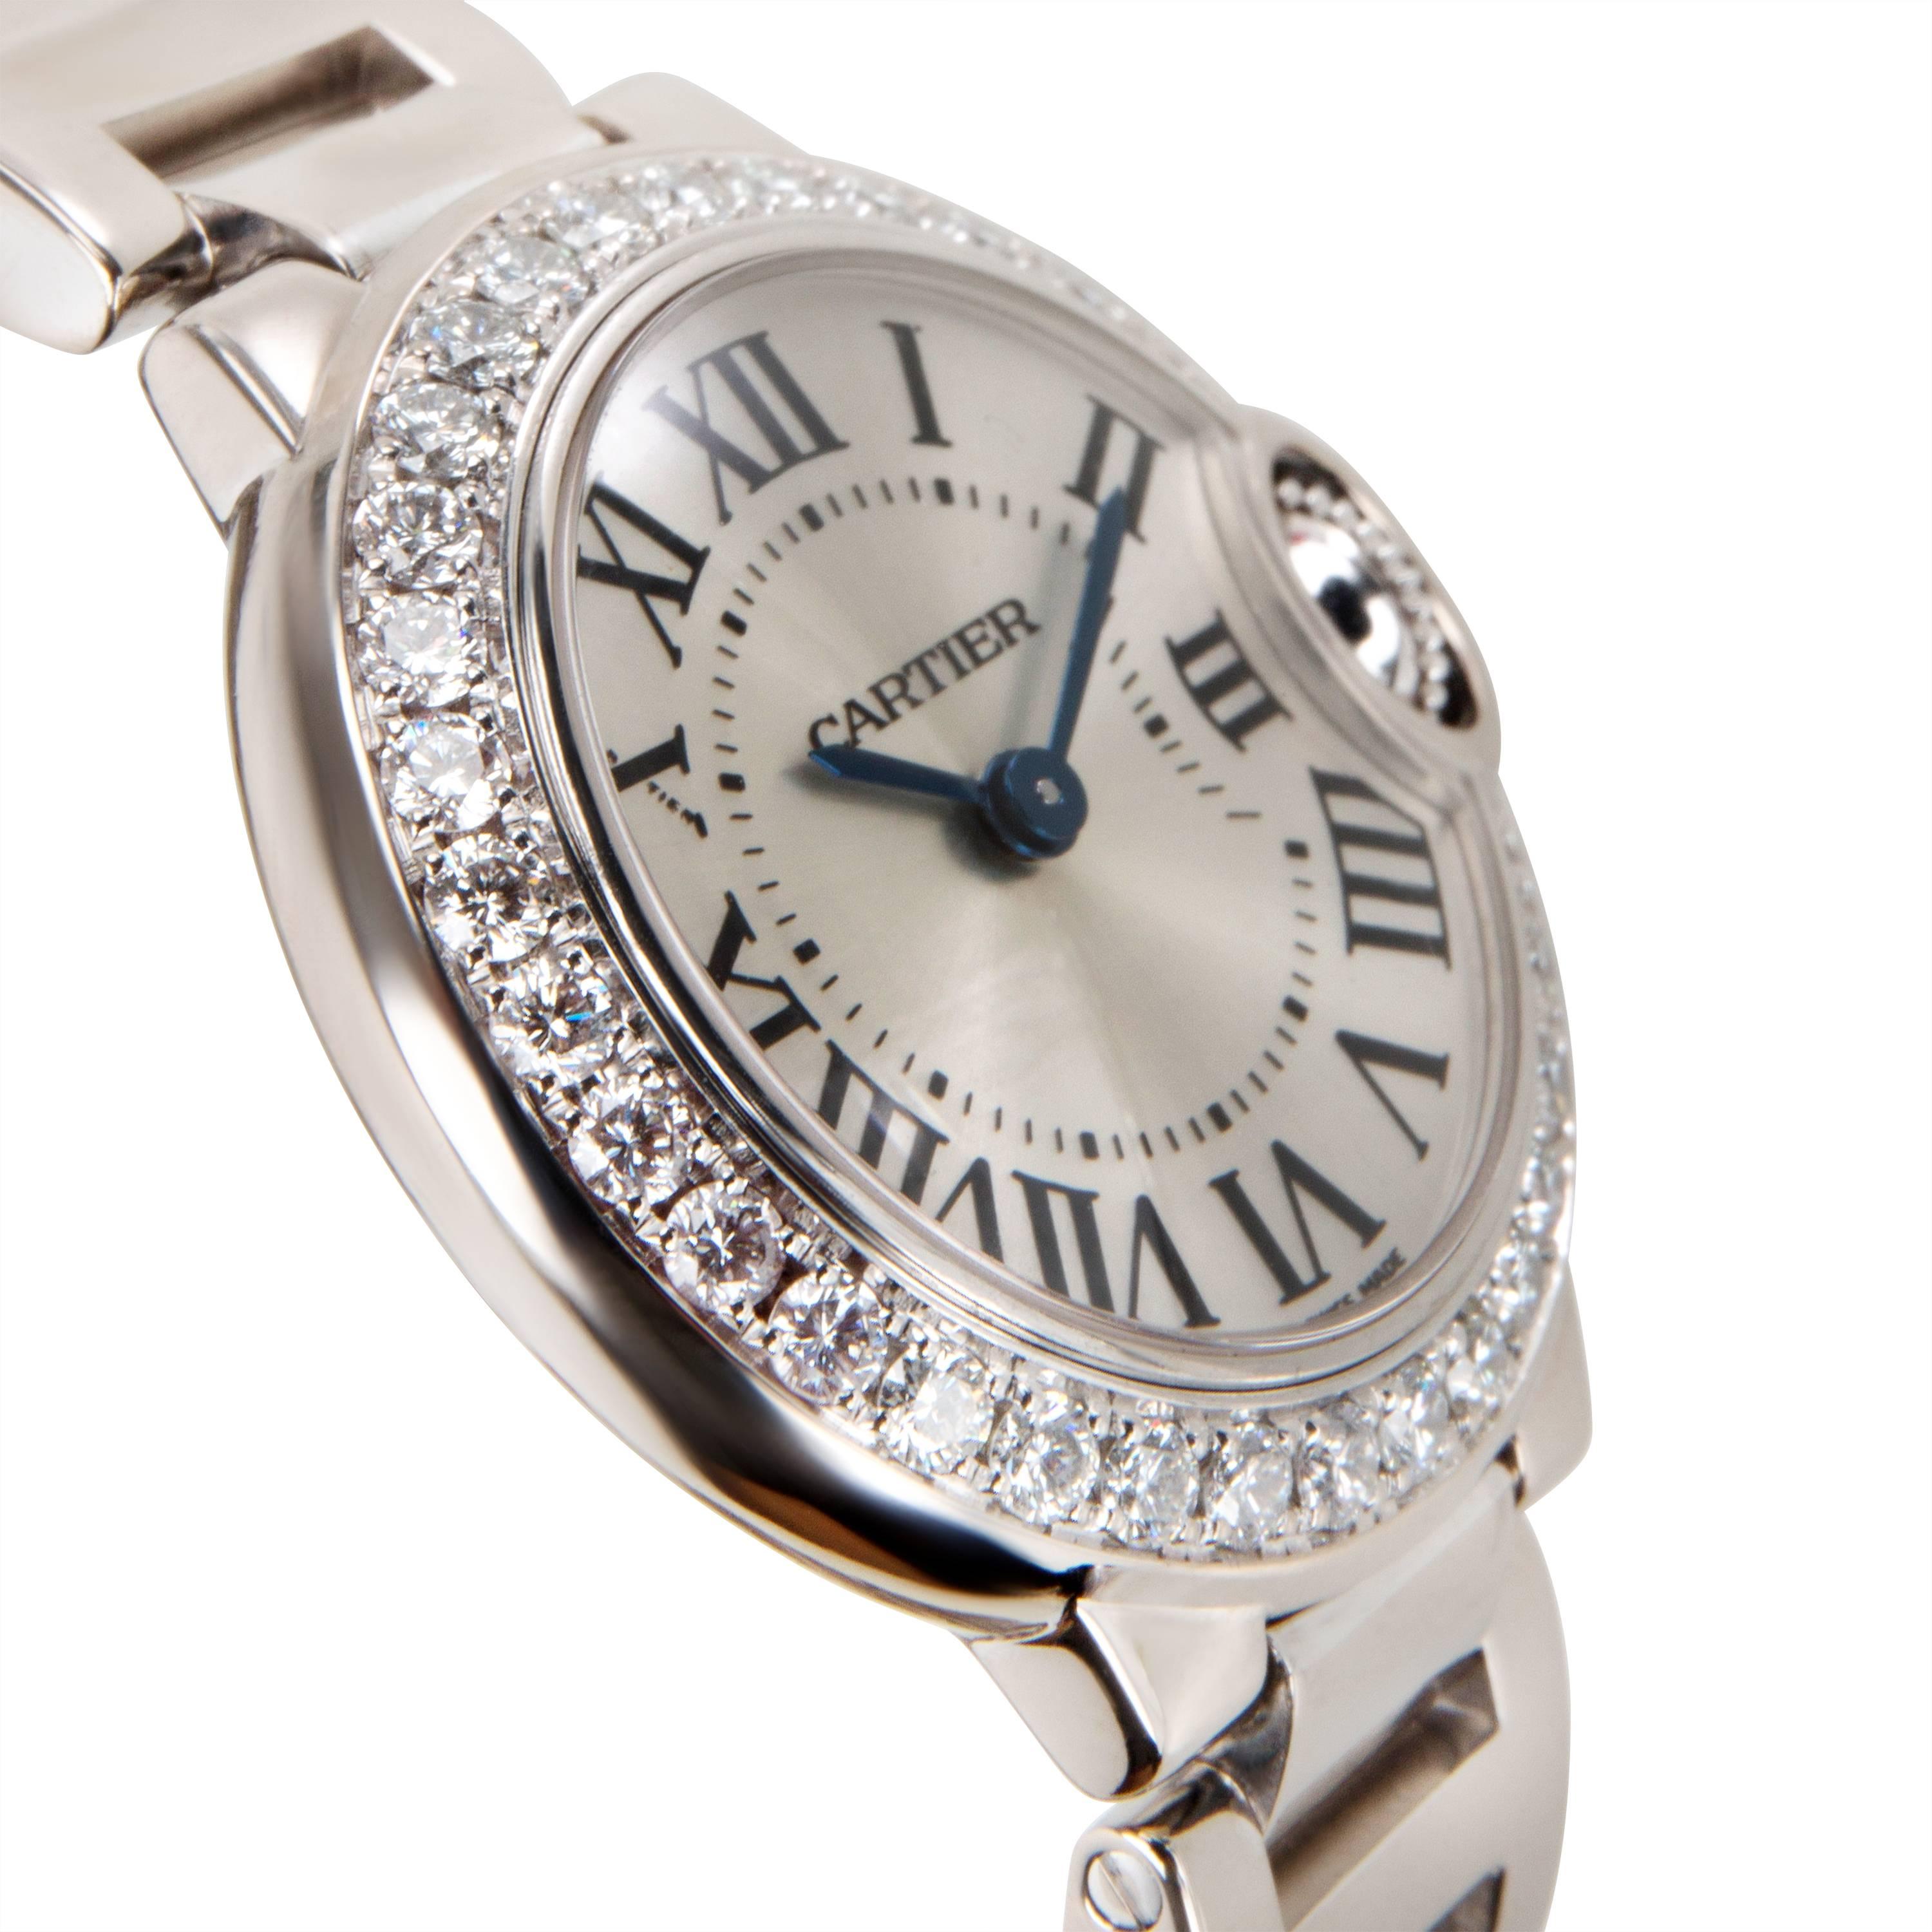 Cartier Ballon Bleu WE9003Z3 Ladies Watch in 18K White Gold. Retail price $37,600.

 In excellent condition and recently serviced by a certified watchmaker. Comes with original box, papers and instructions. 

PRIMARY DETAILS
Brand:  Cartier
Model: